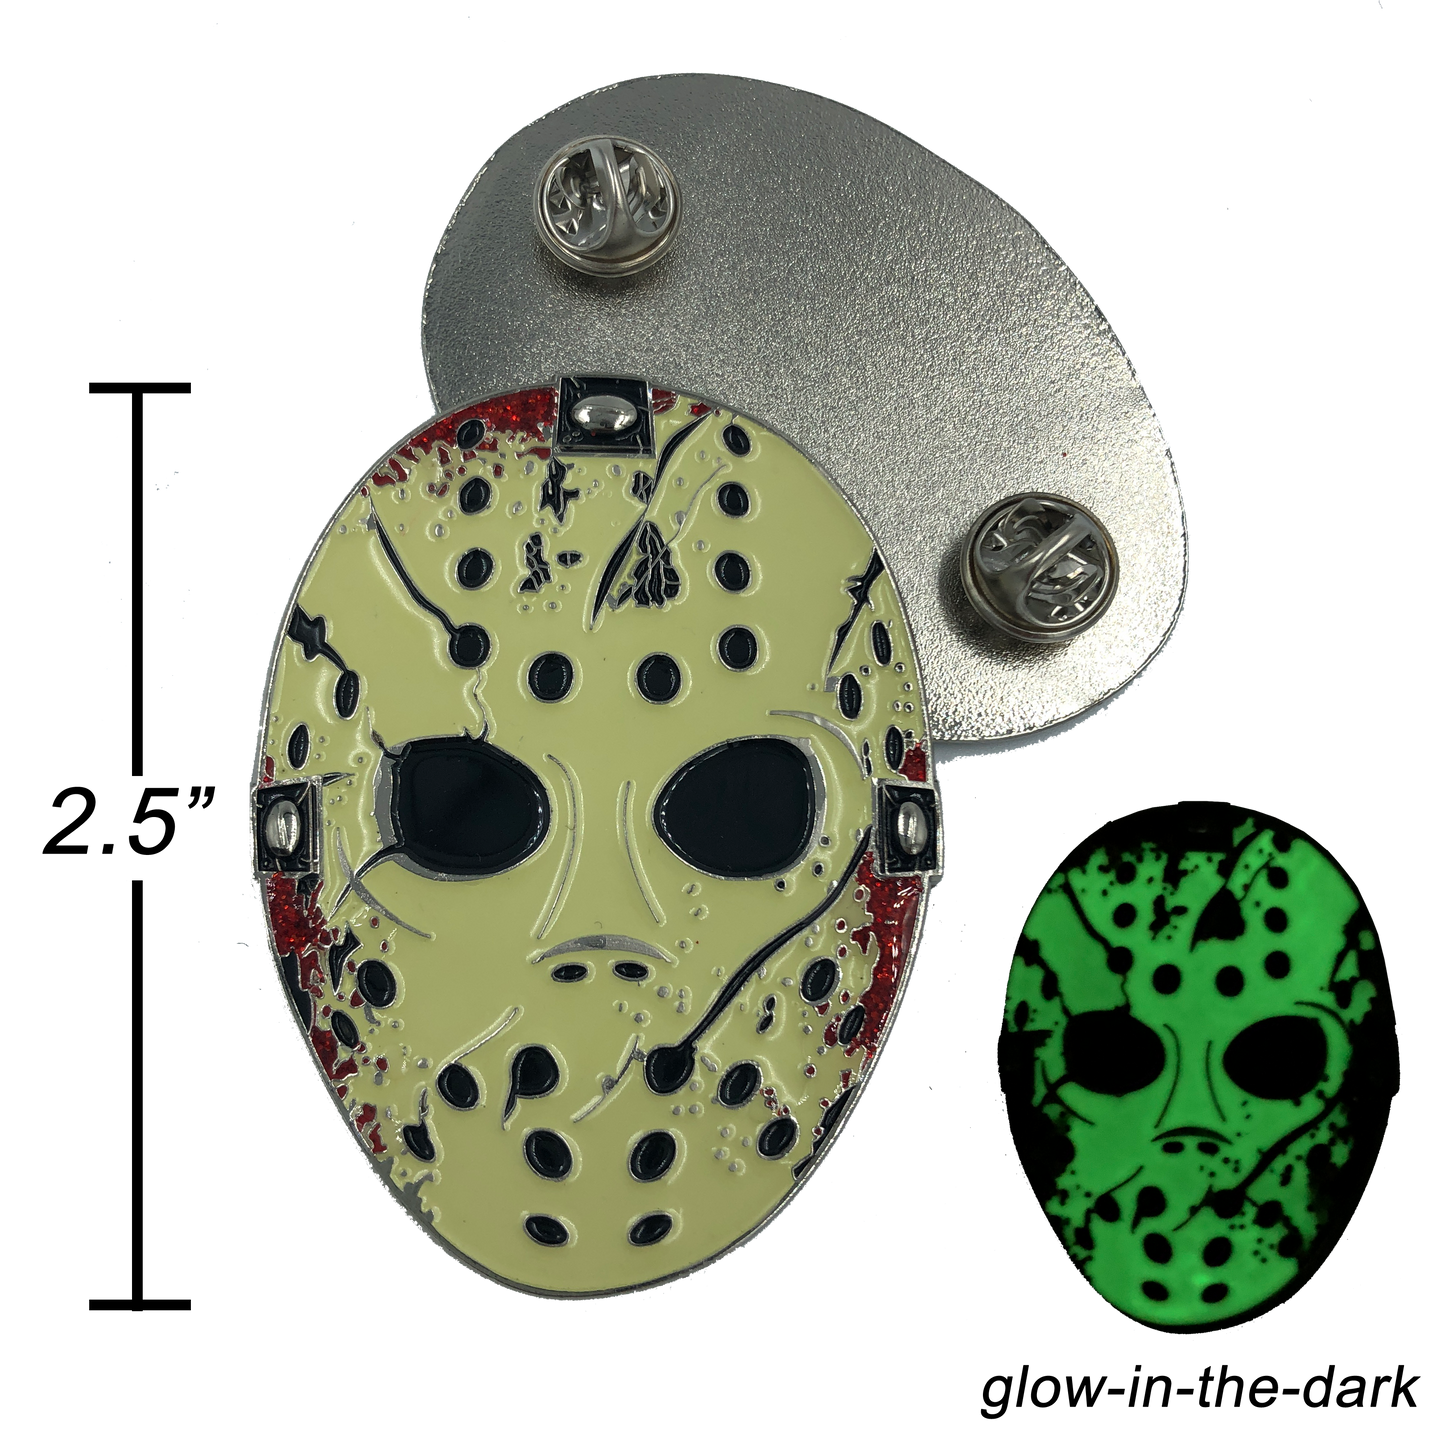 II-016 Jason Voorhees Goalie Mask Friday the 13th inspired pin glows in the dark